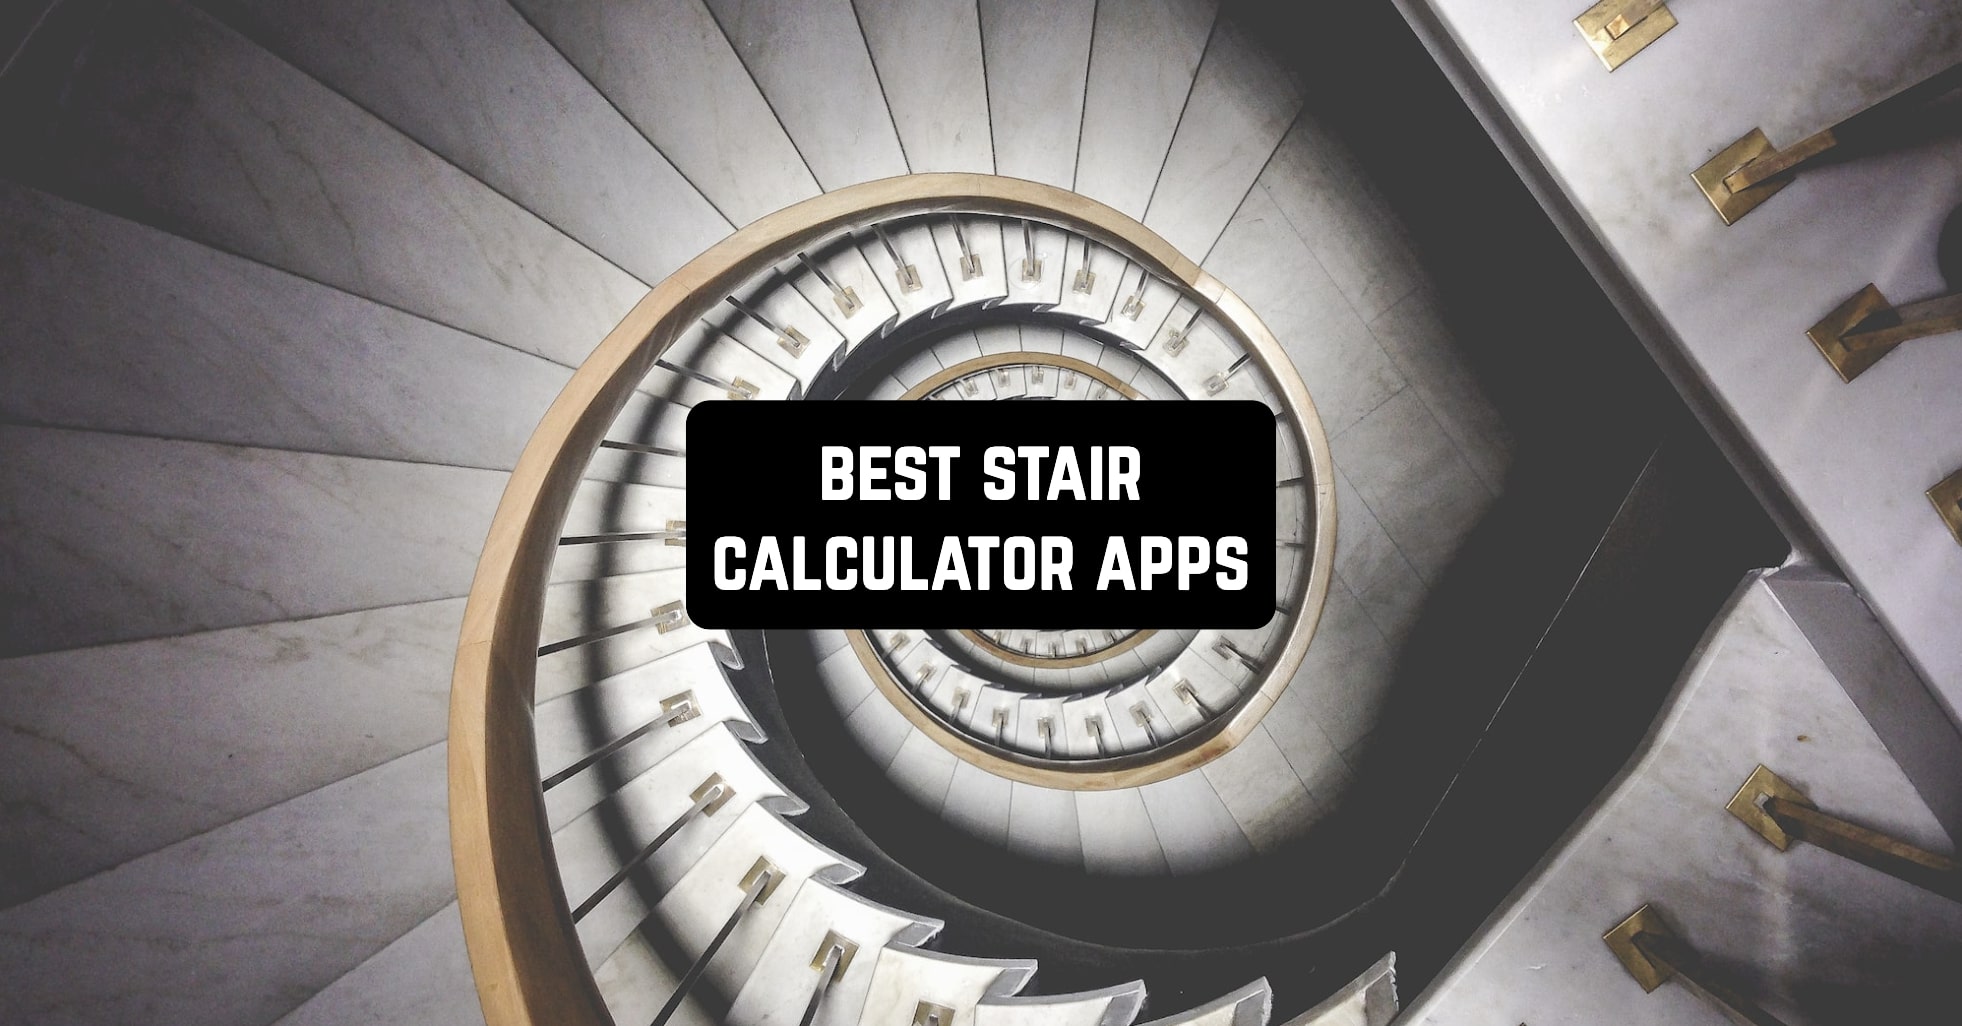 Stair Calculator 2 on the App Store